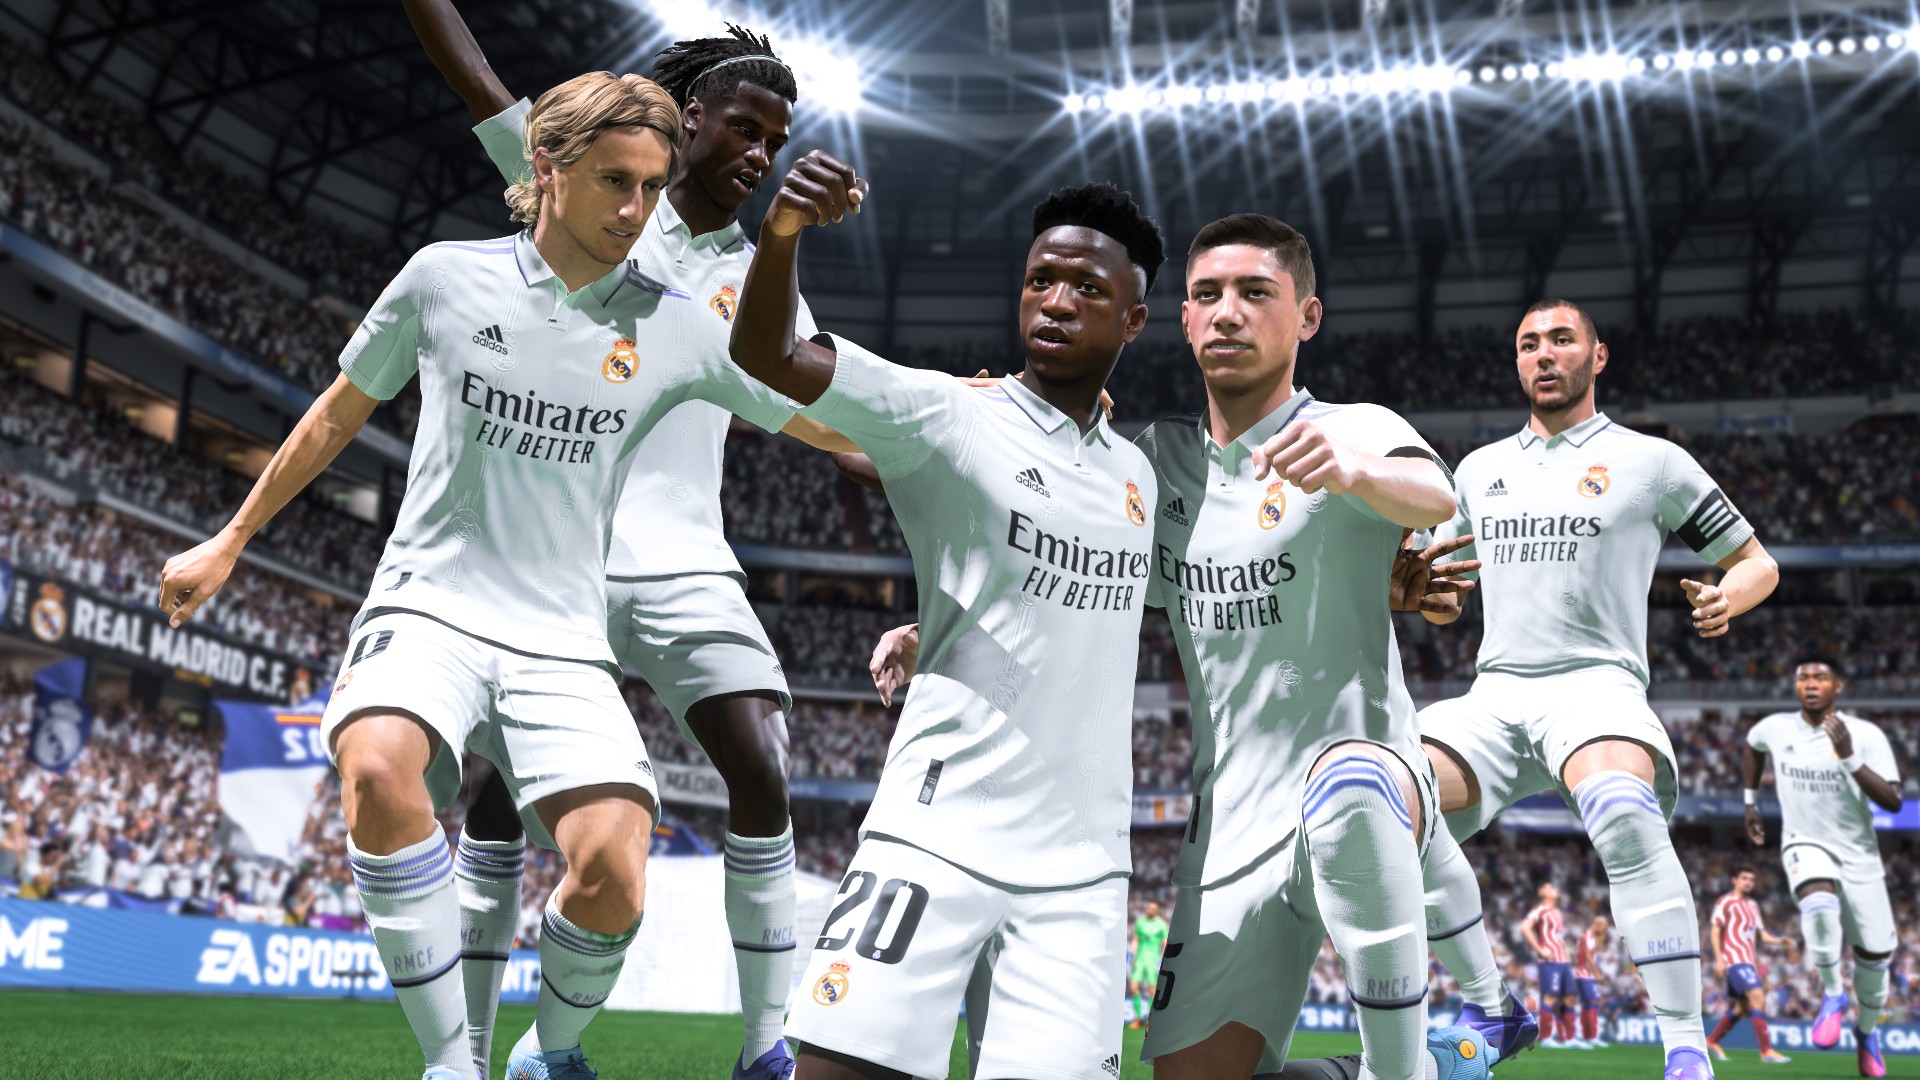 FIFA 23 Review